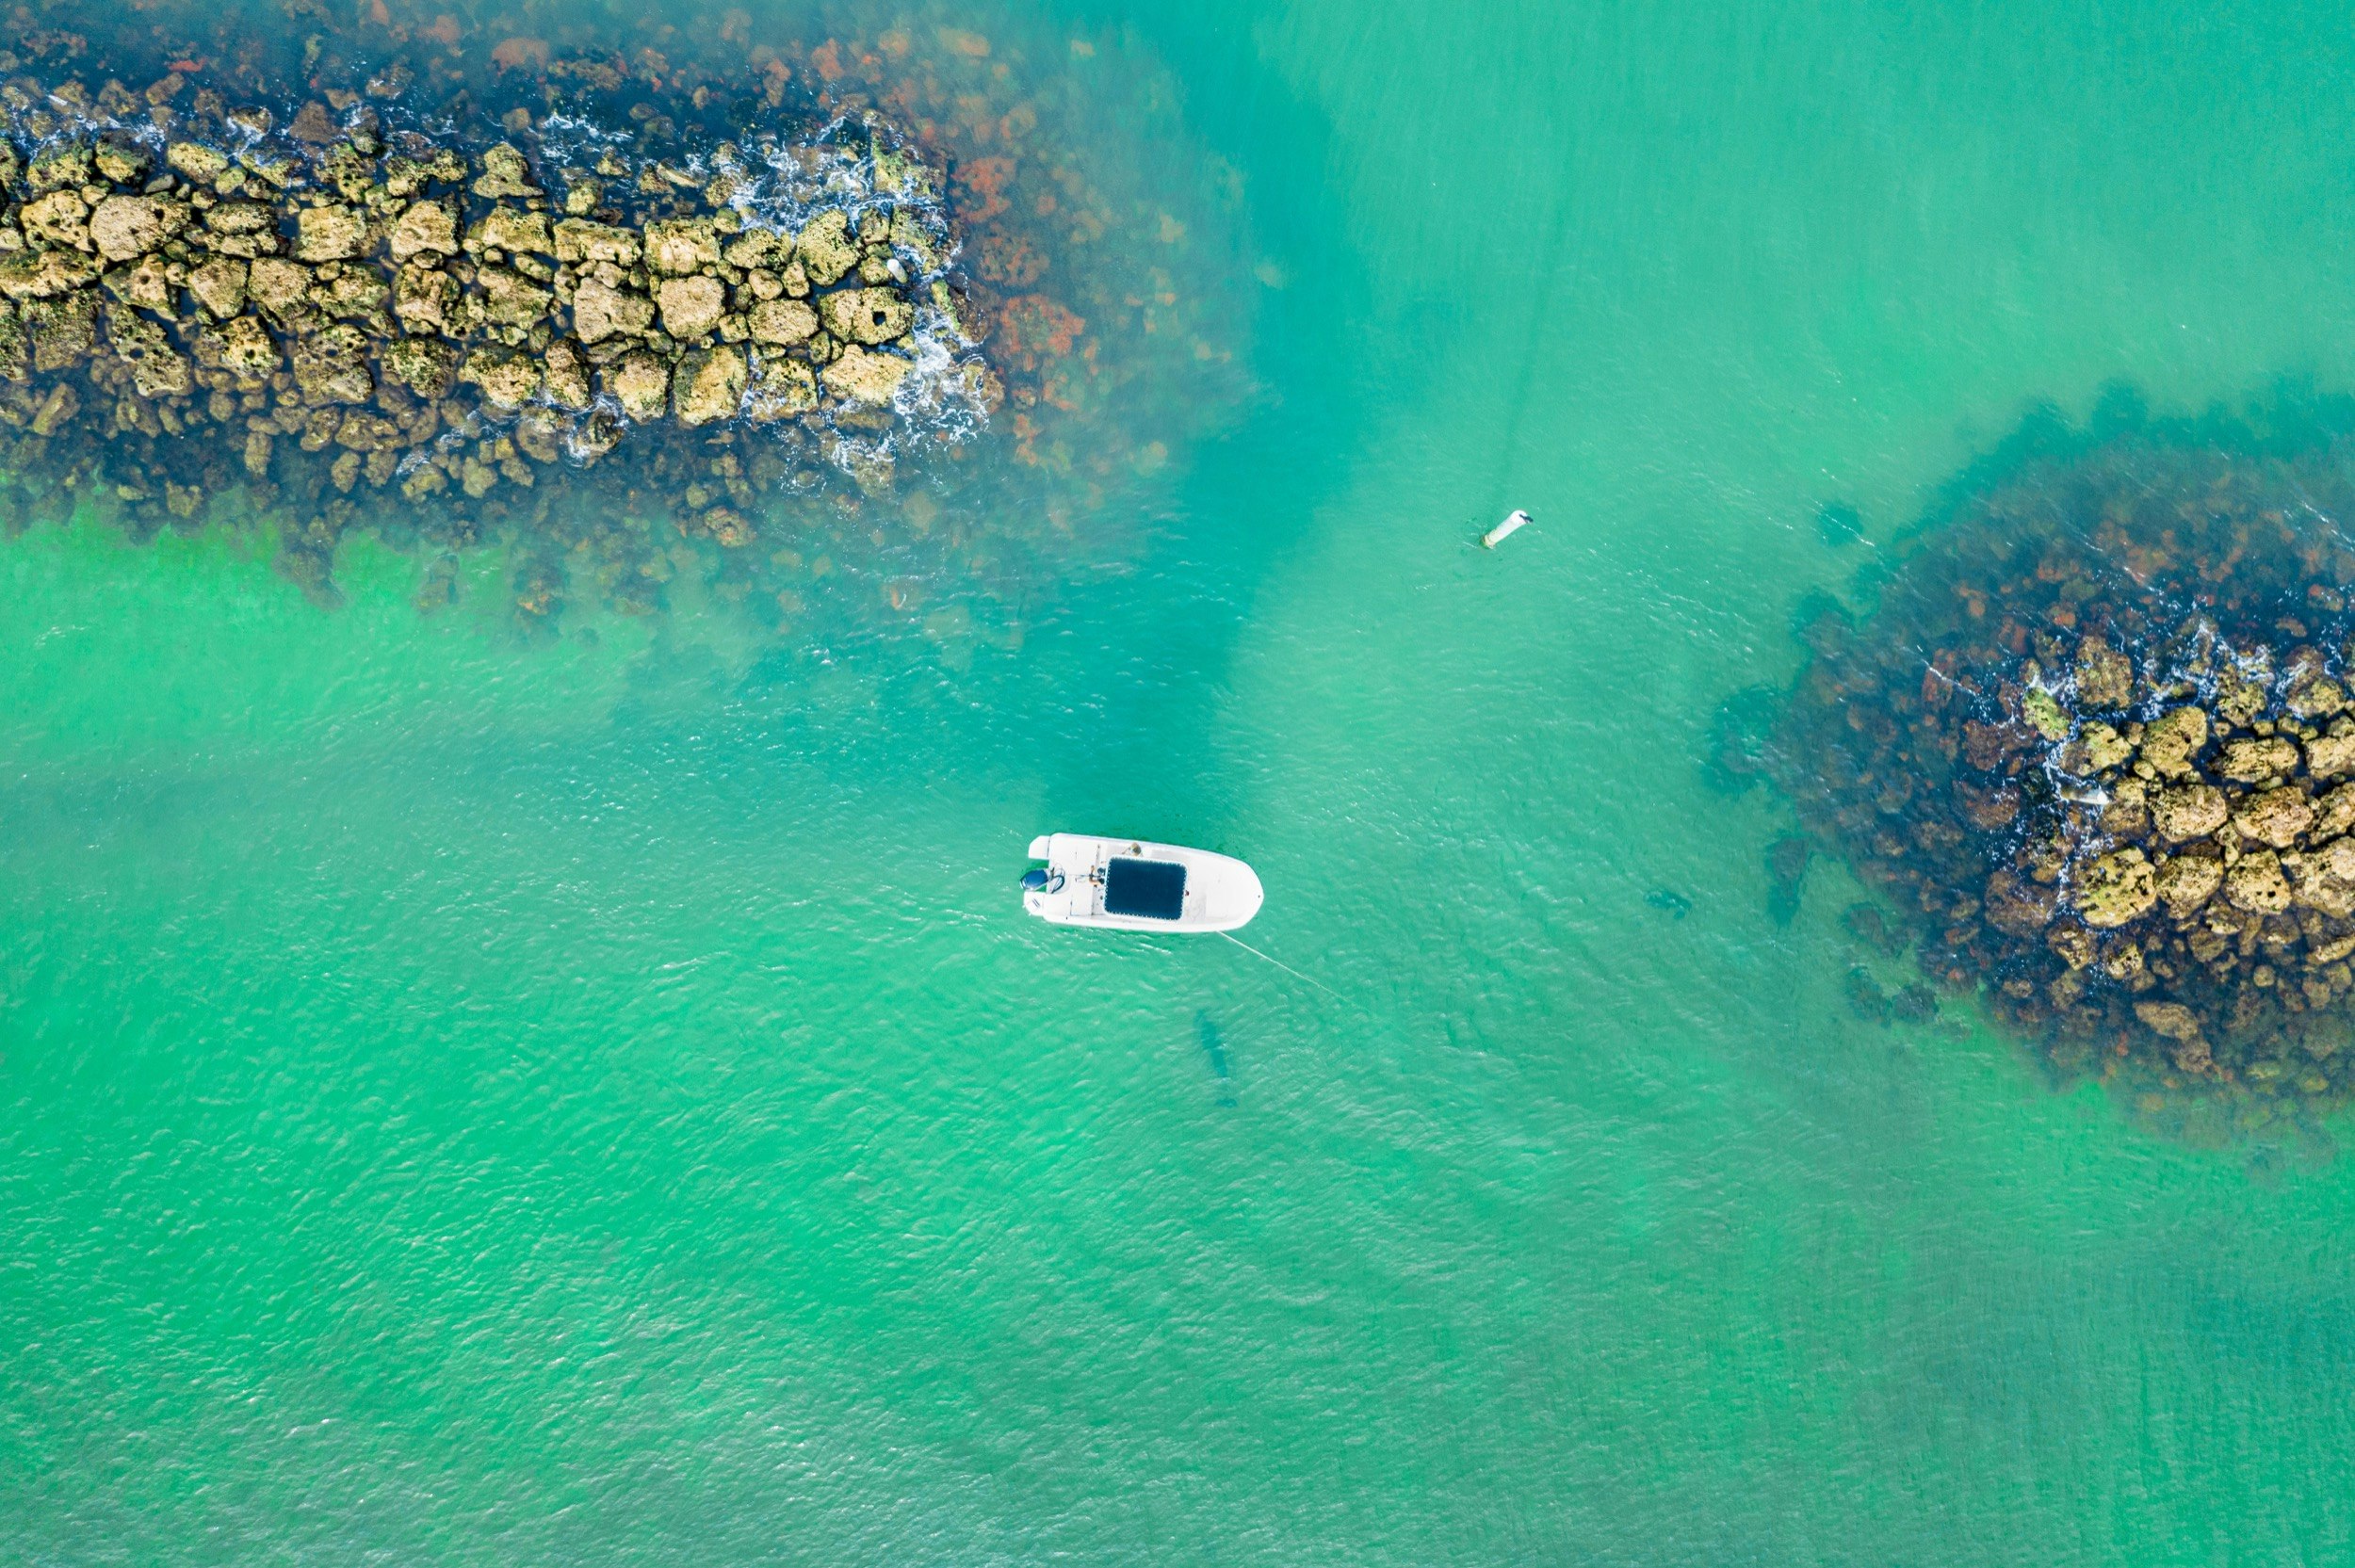 Looking down from above on a small motorboat exploring several rocky islands in southwest Florida